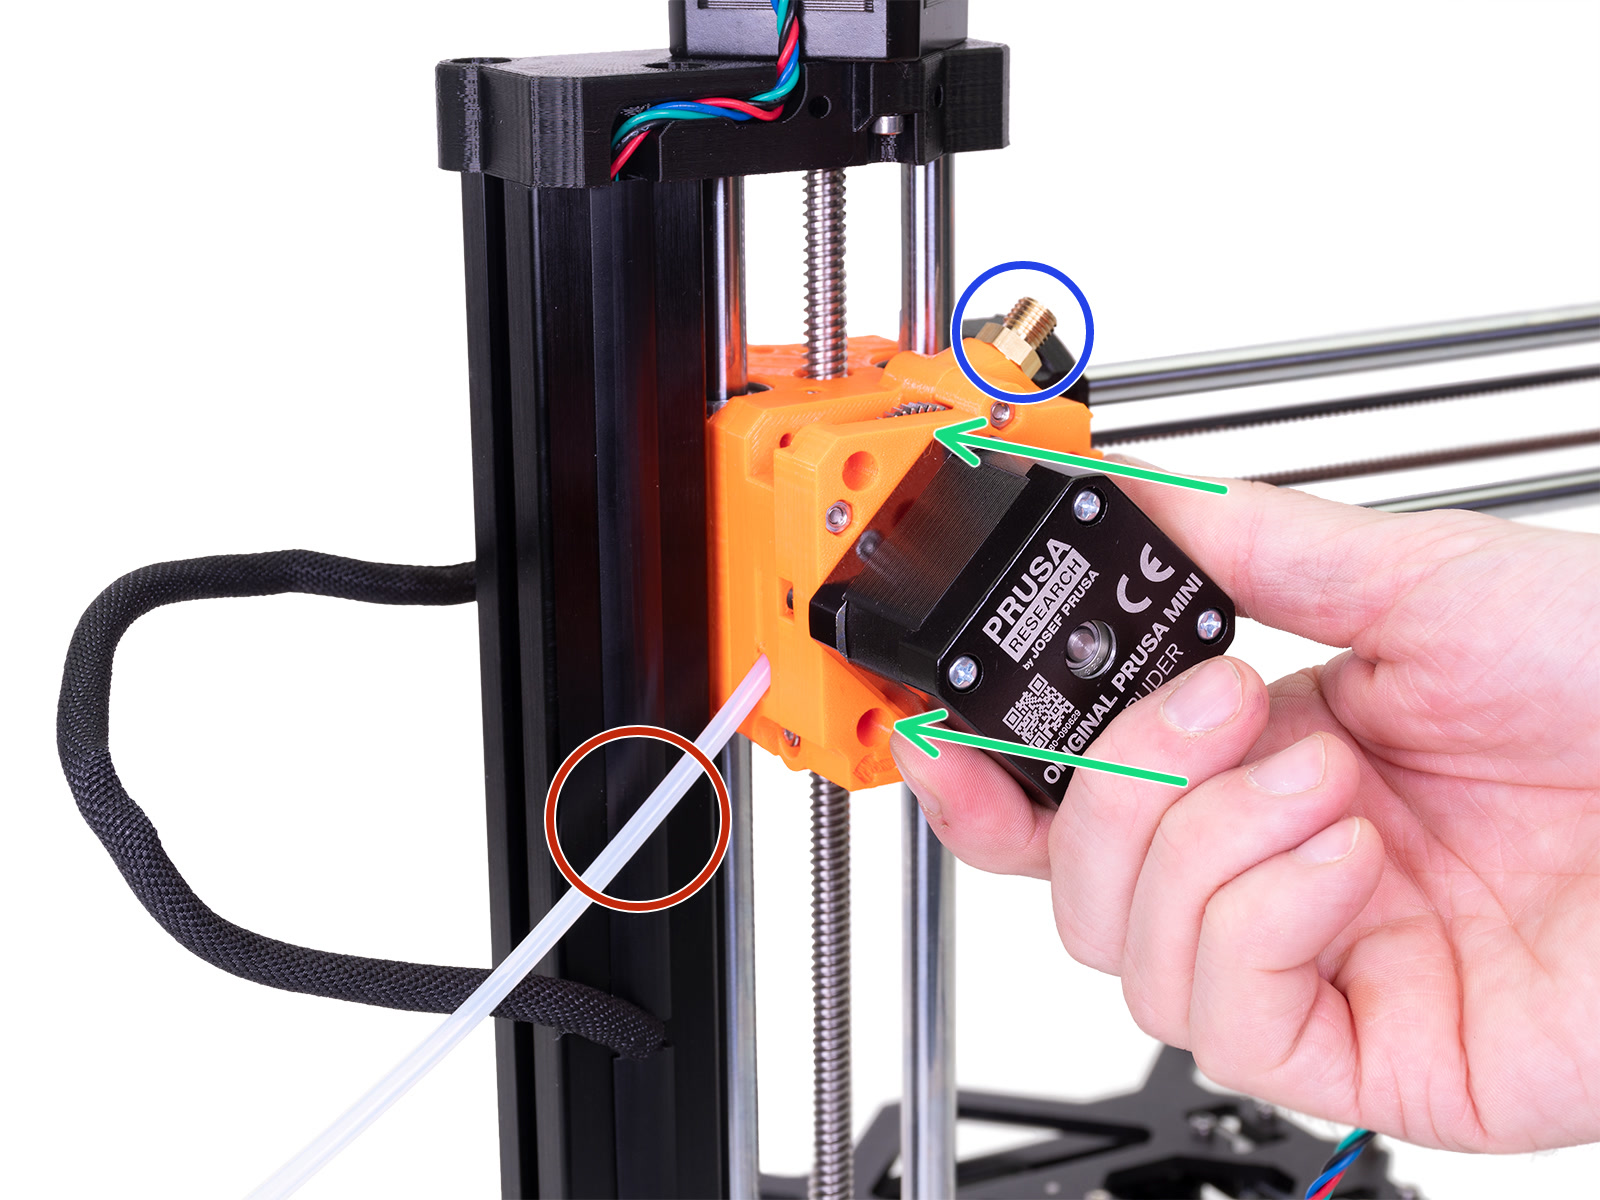 Mounting the Extruder